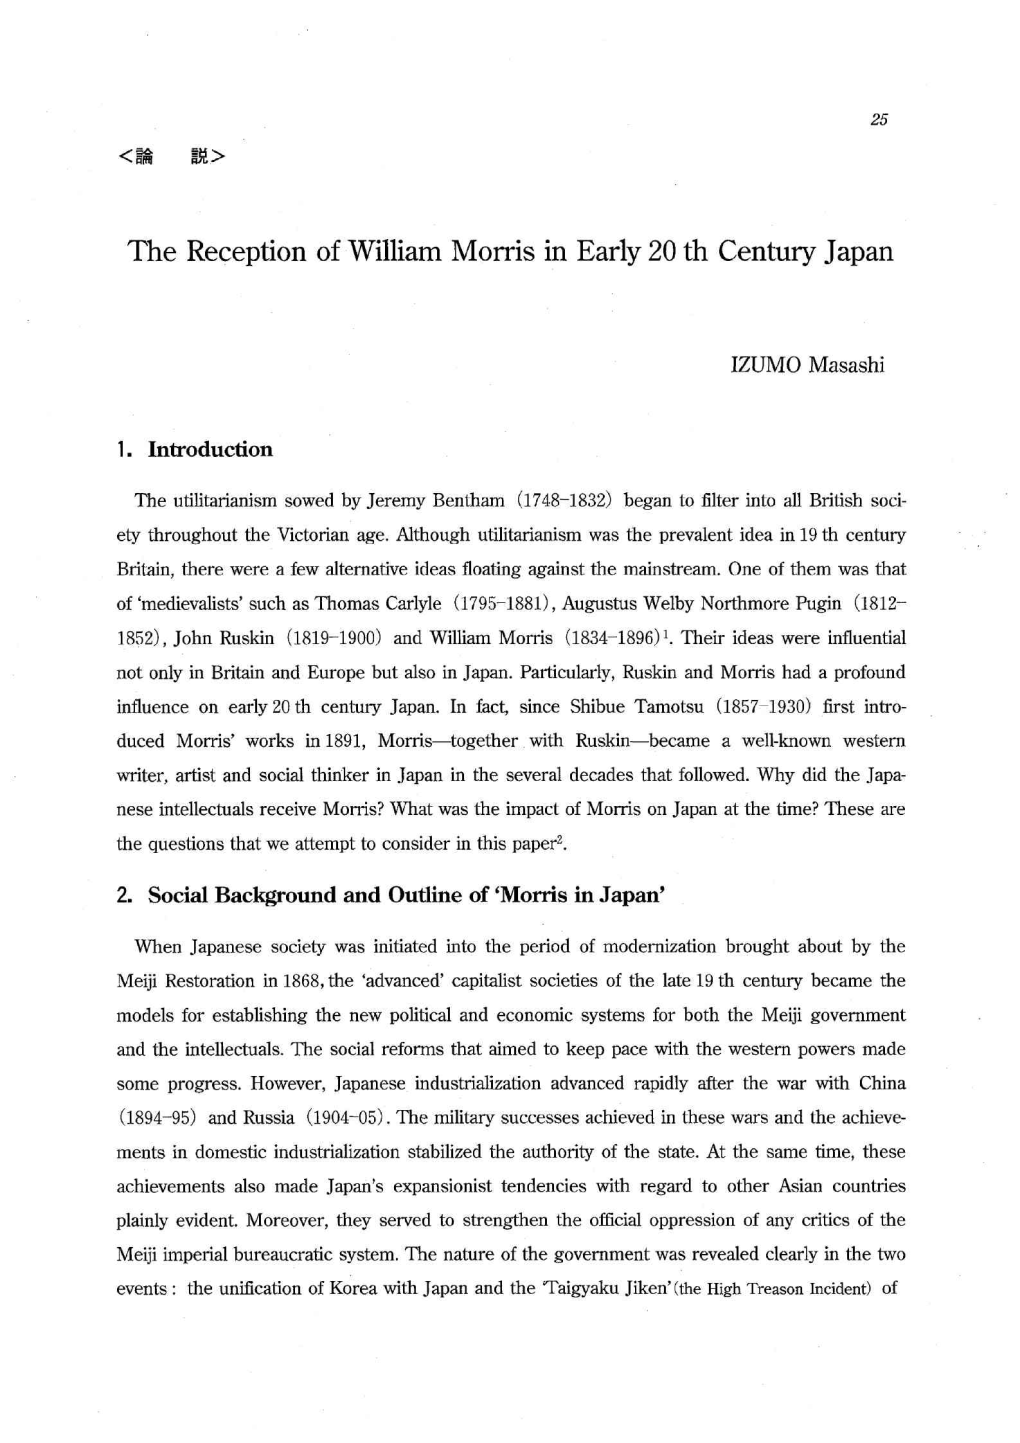 The Reception of William Morris in Early 20 Th Century Japan